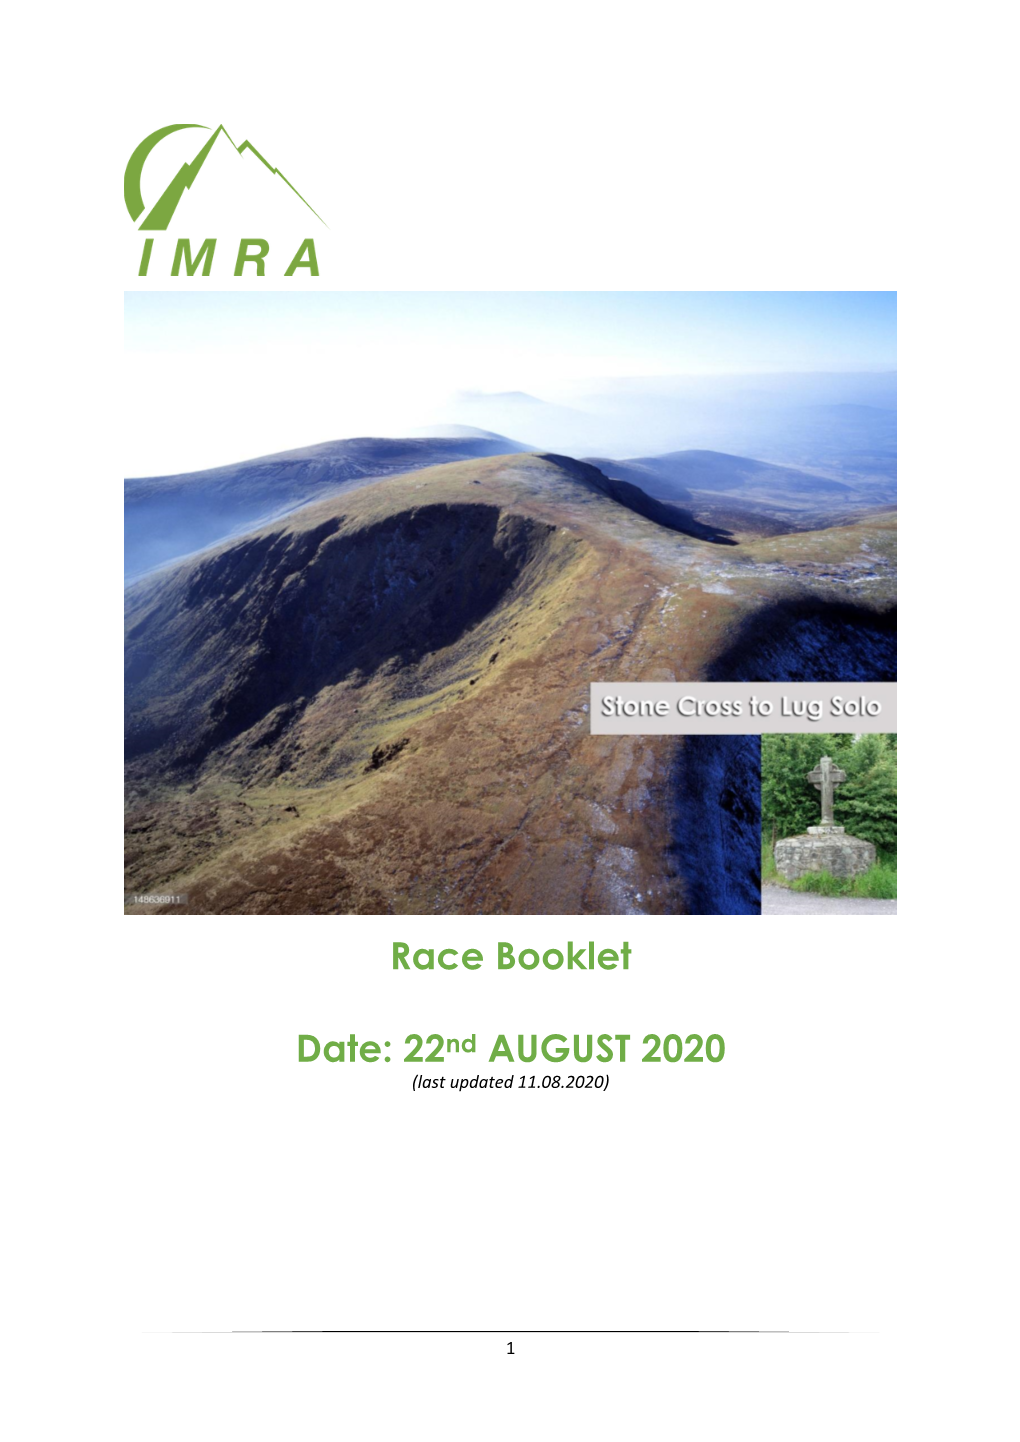 Race Booklet Date: 22Nd AUGUST 2020